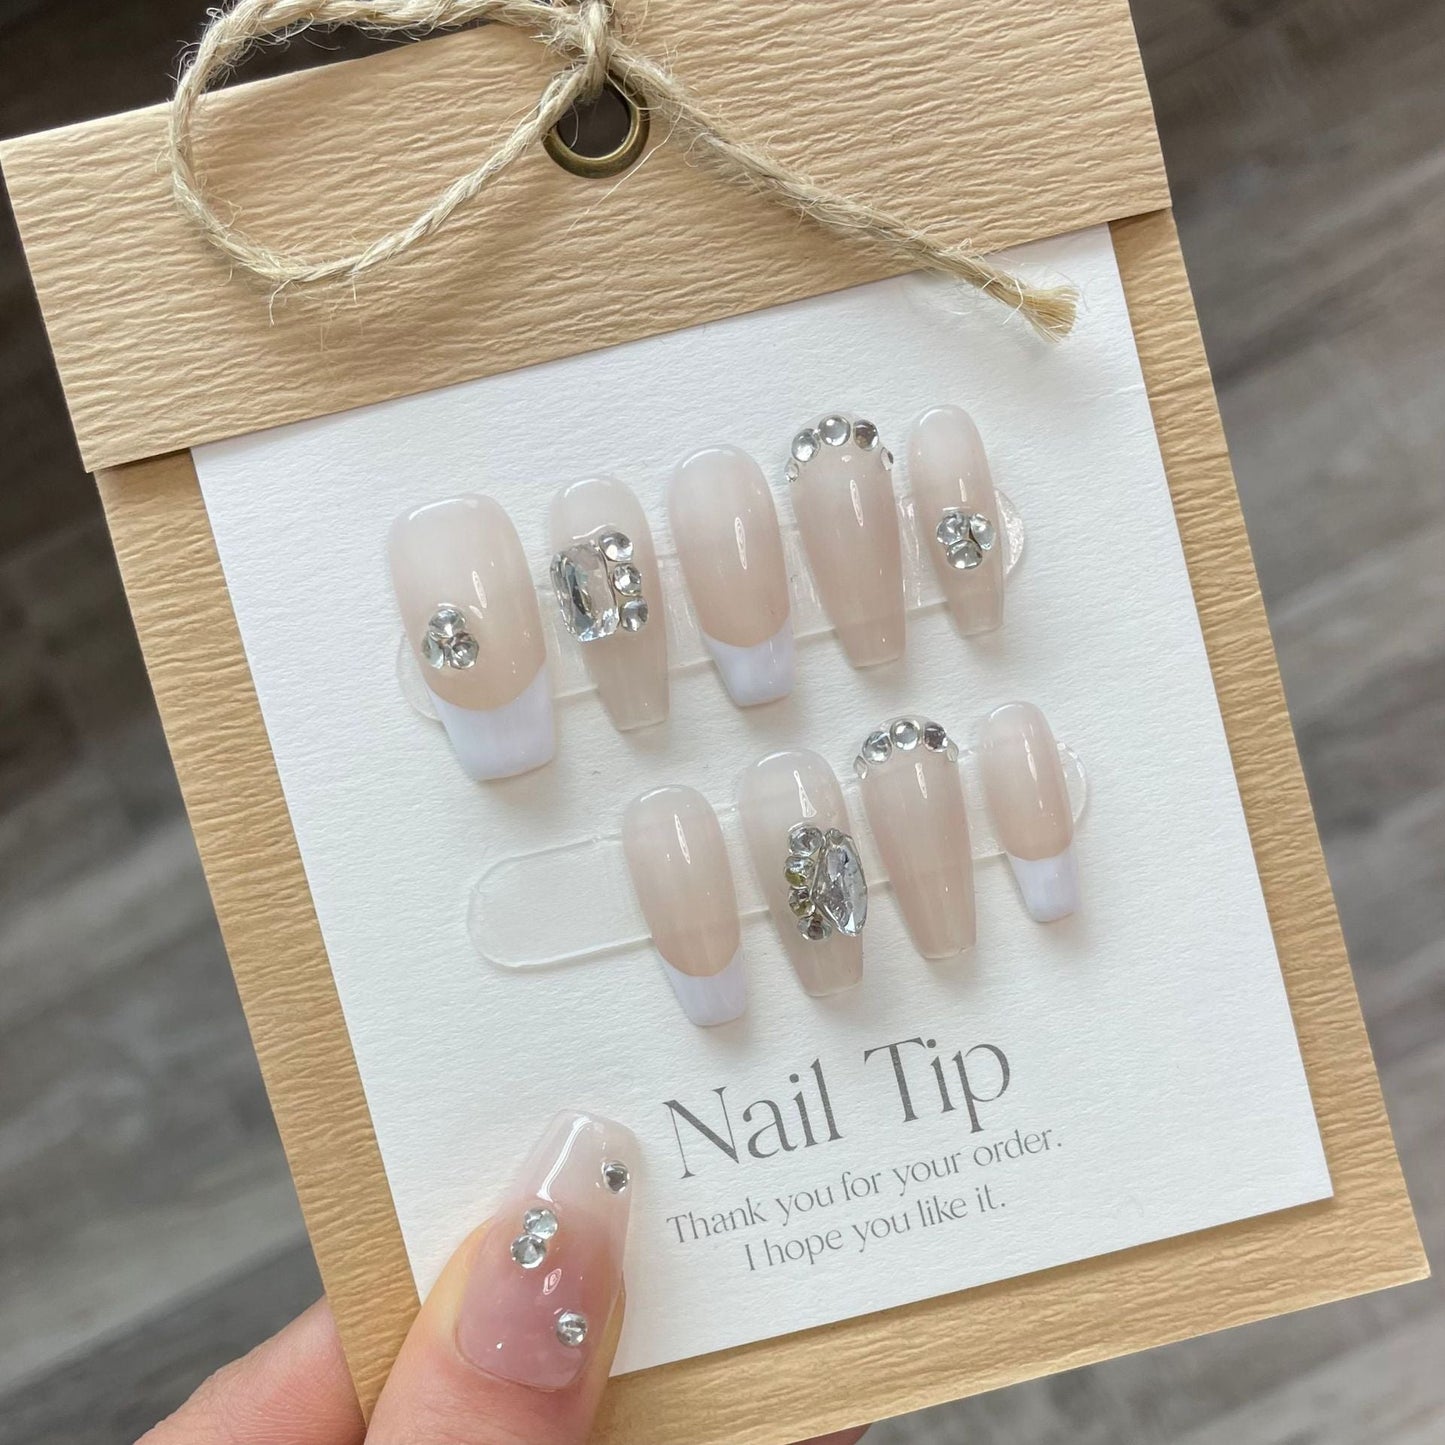 749 French style press on nails 100% handmade false nails nude color